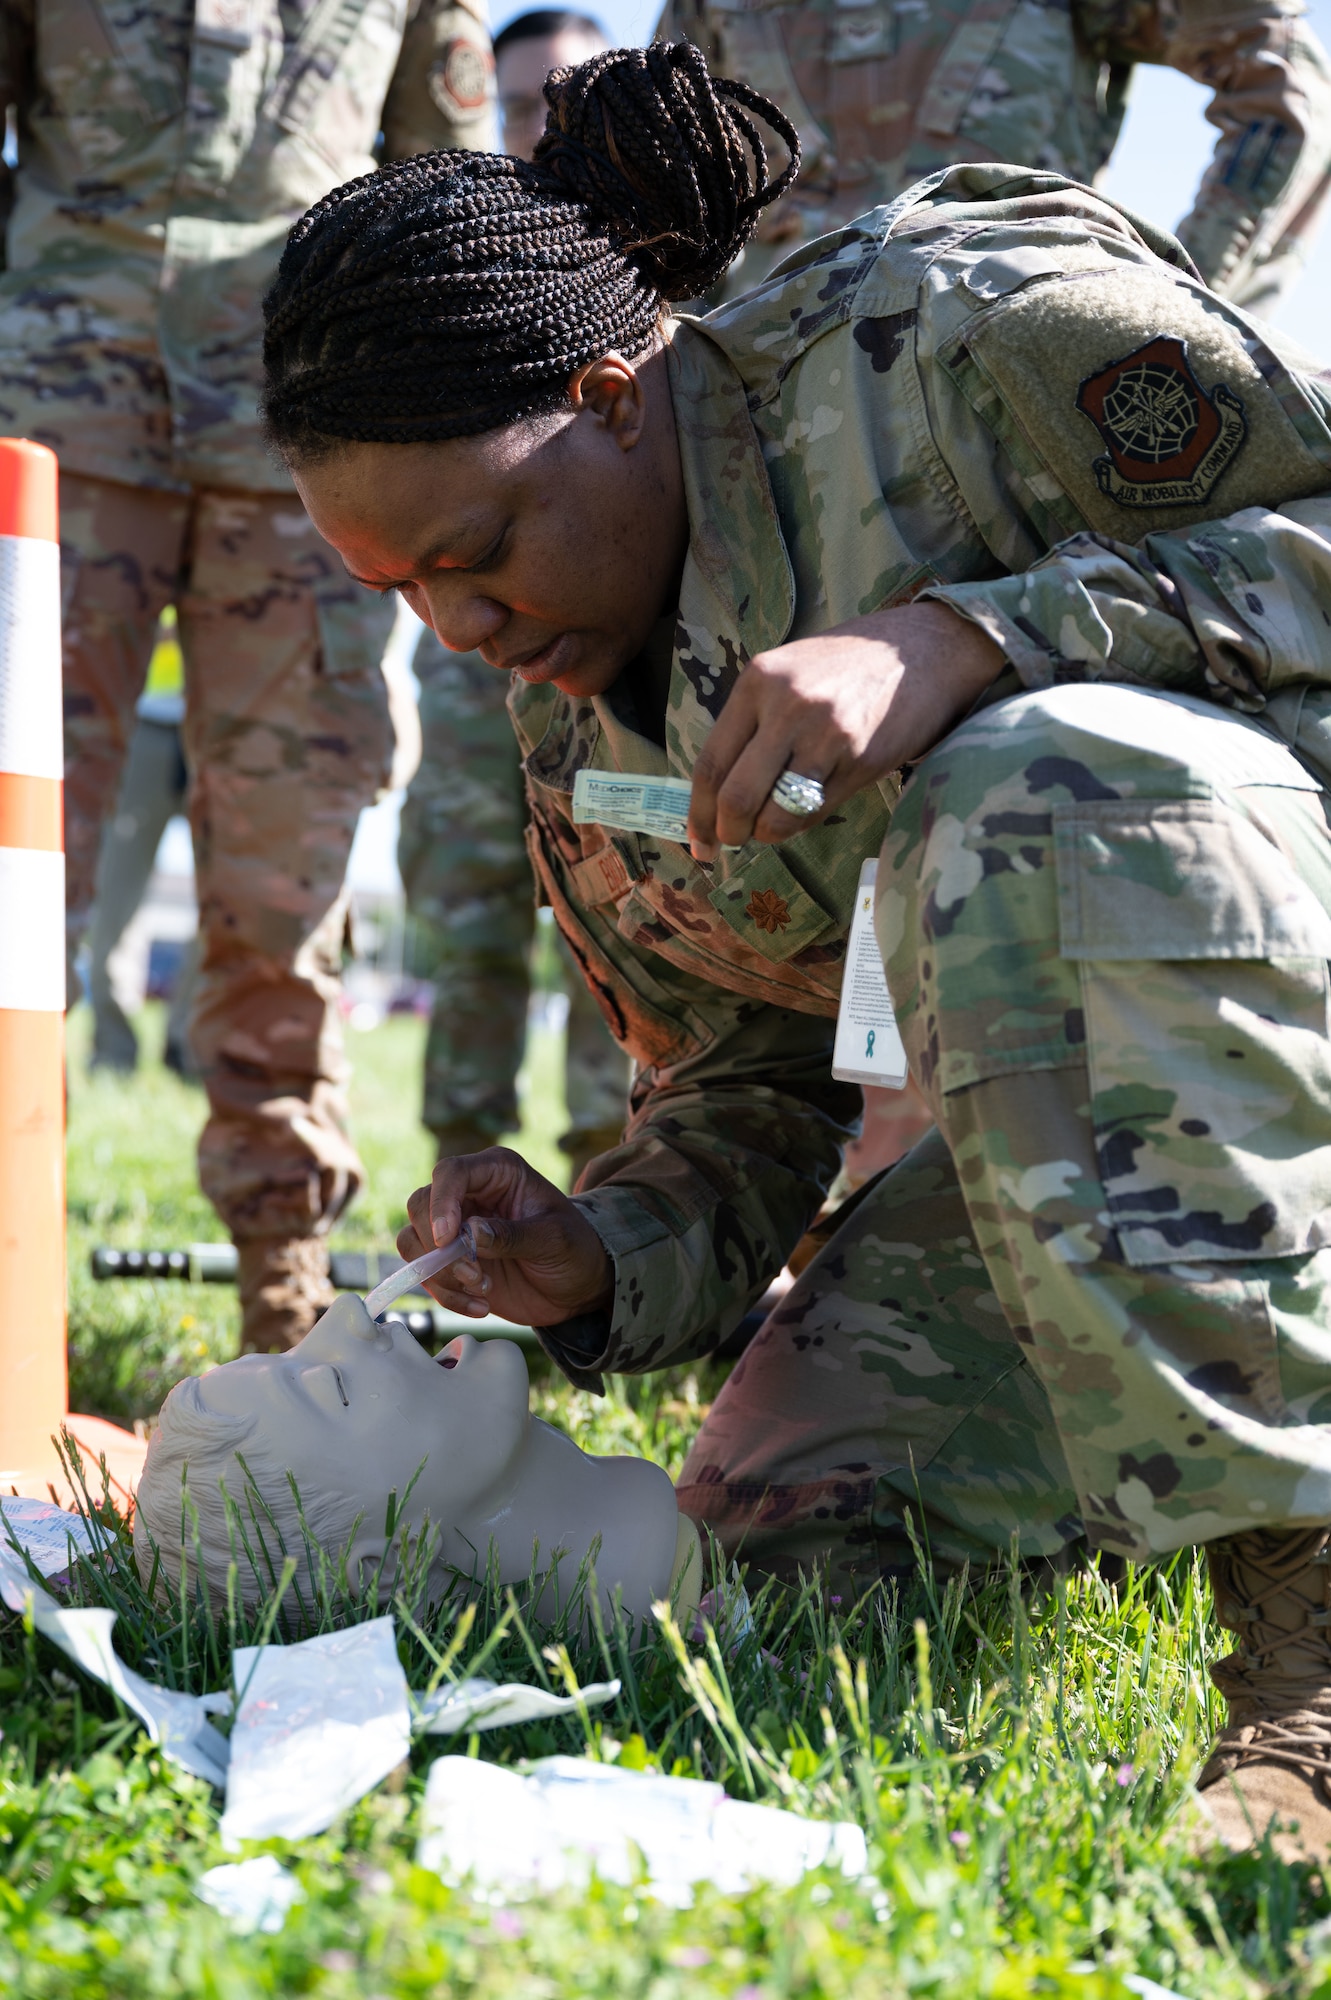 Maj. Nina Brown, 436th Operational Medical Readiness Squadron clinical nurse, inserts a nasopharyngeal airway into a simulated trauma patient during Exercise Ready Eagle on Dover Air Force Base, Delaware, May 17, 2022. The exercise promoted medical response capabilities by providing hands-on training, instruction and a final cumulative exercise. (U.S. Air Force photo by Airman 1st Class Cydney Lee)